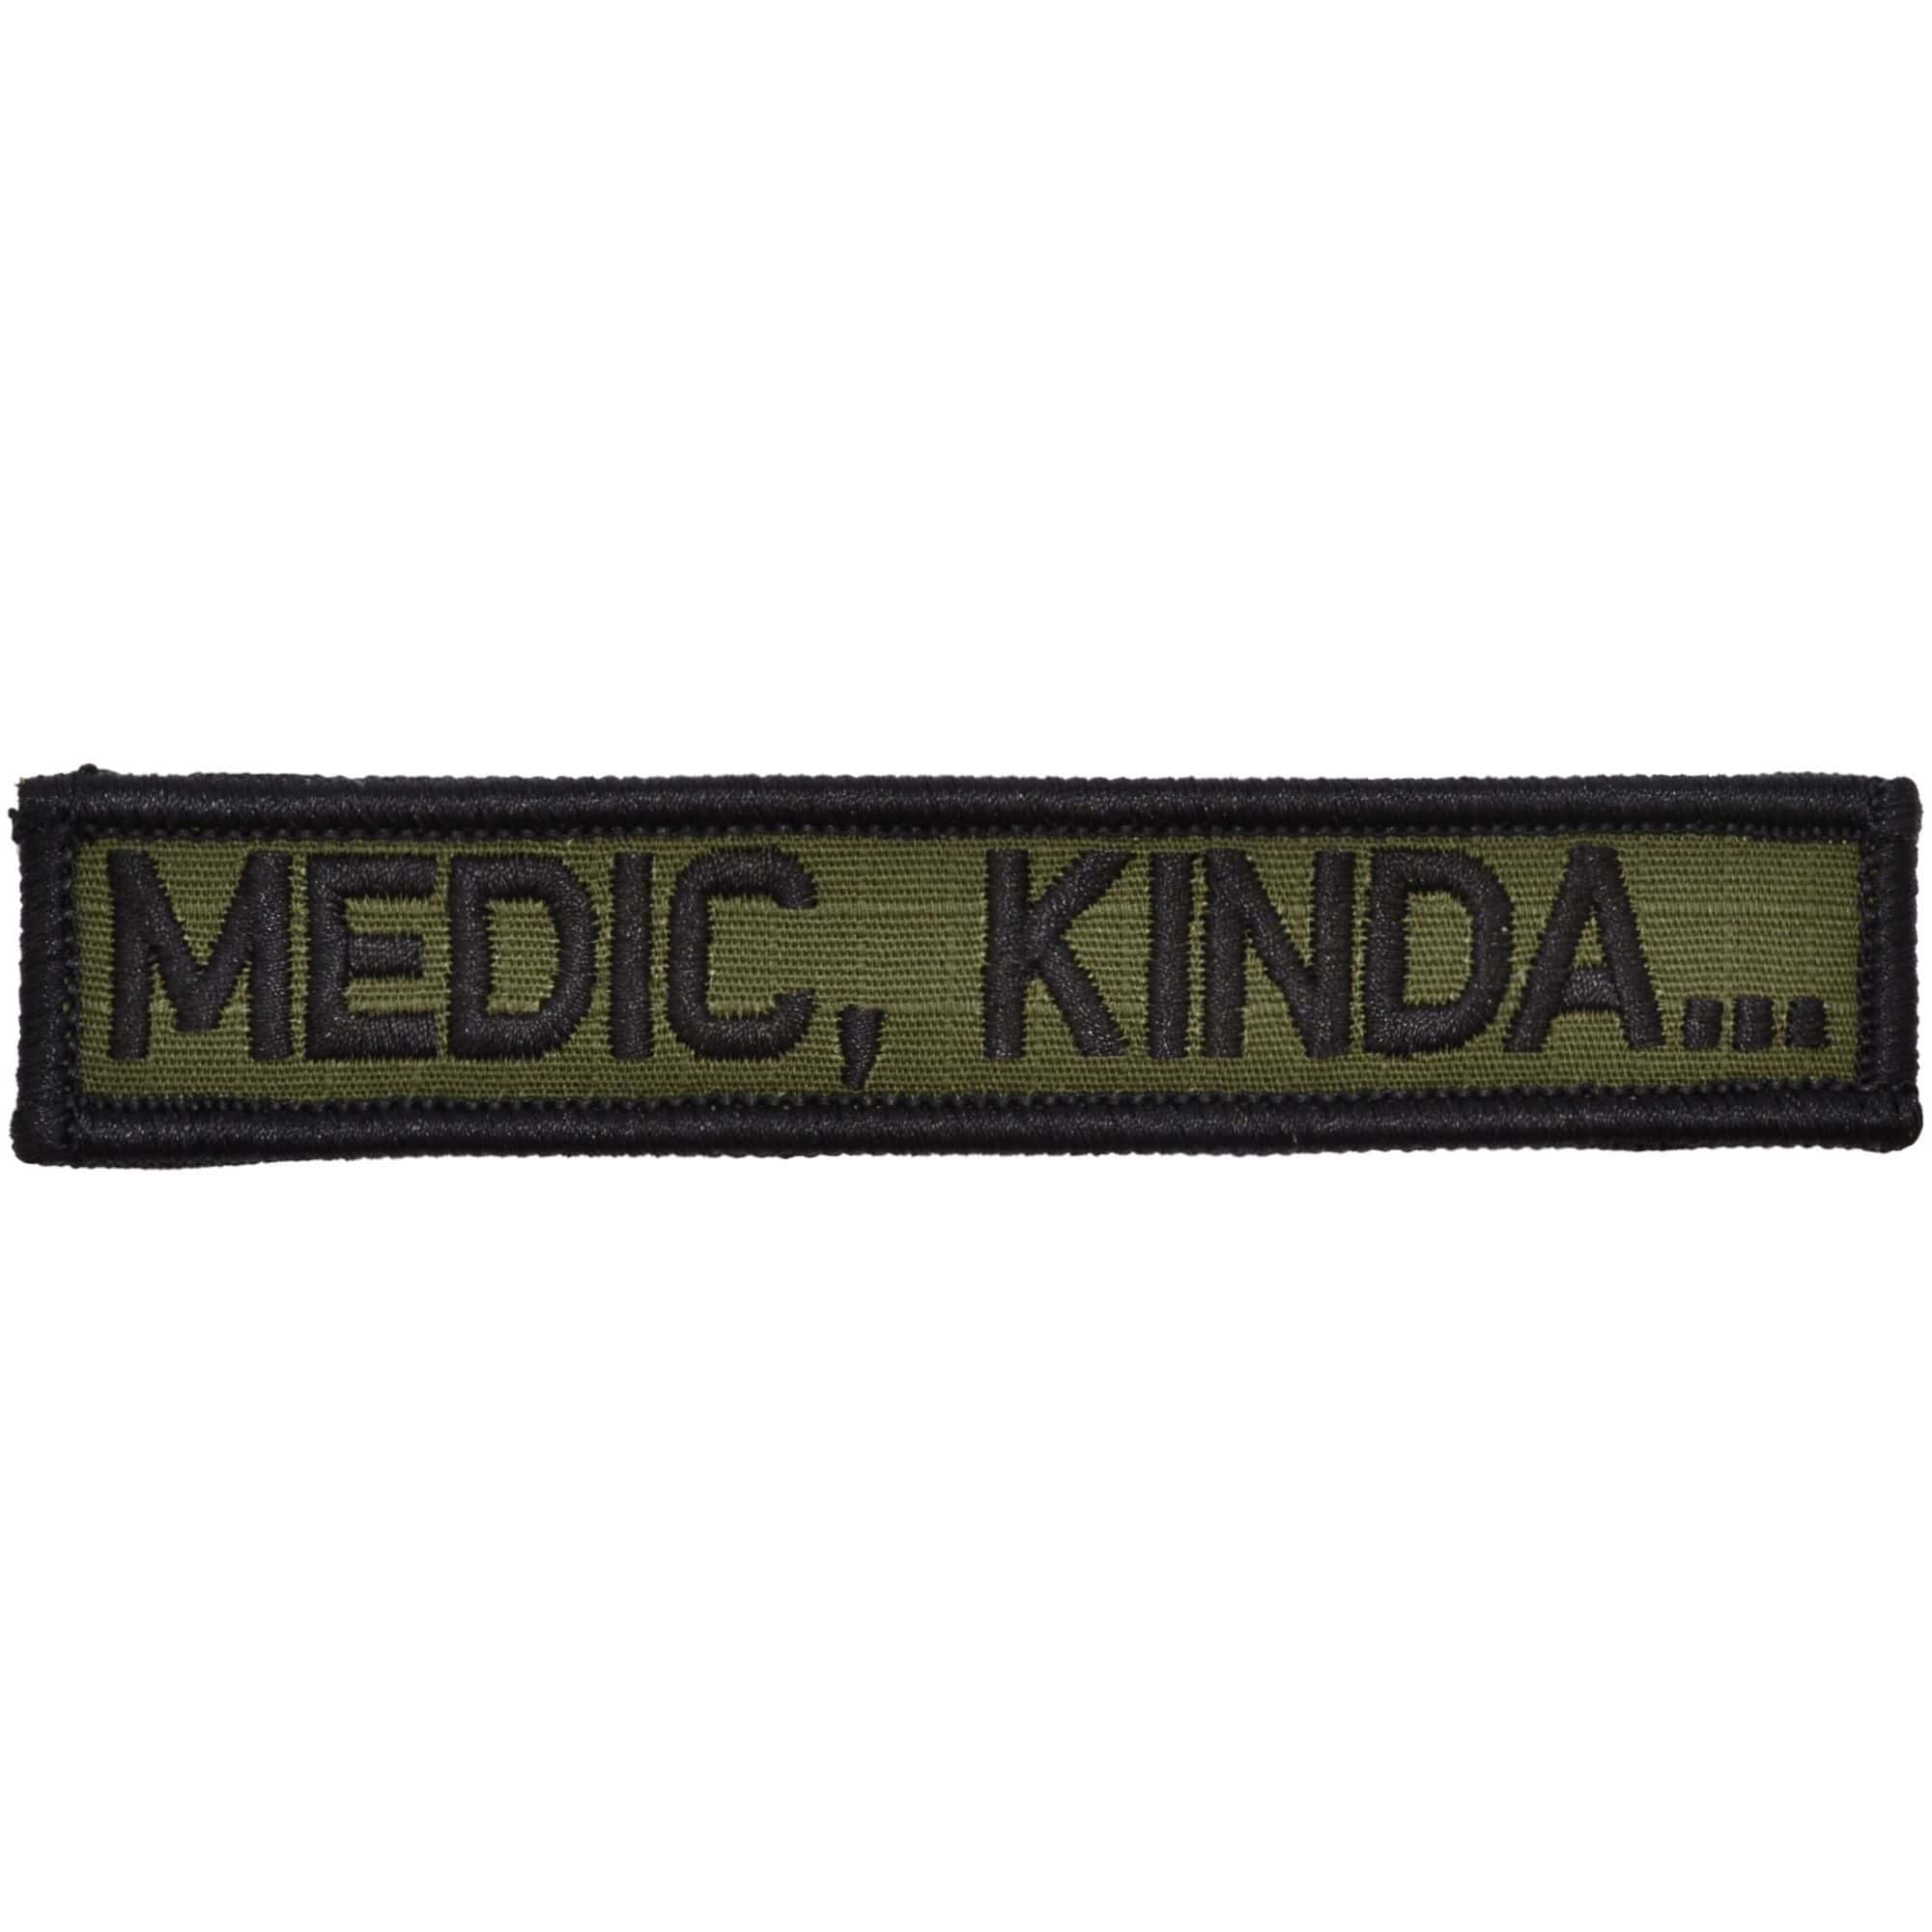 Tactical Gear Junkie Patches Olive Drab Medic, Kinda... - 1x5 Patch